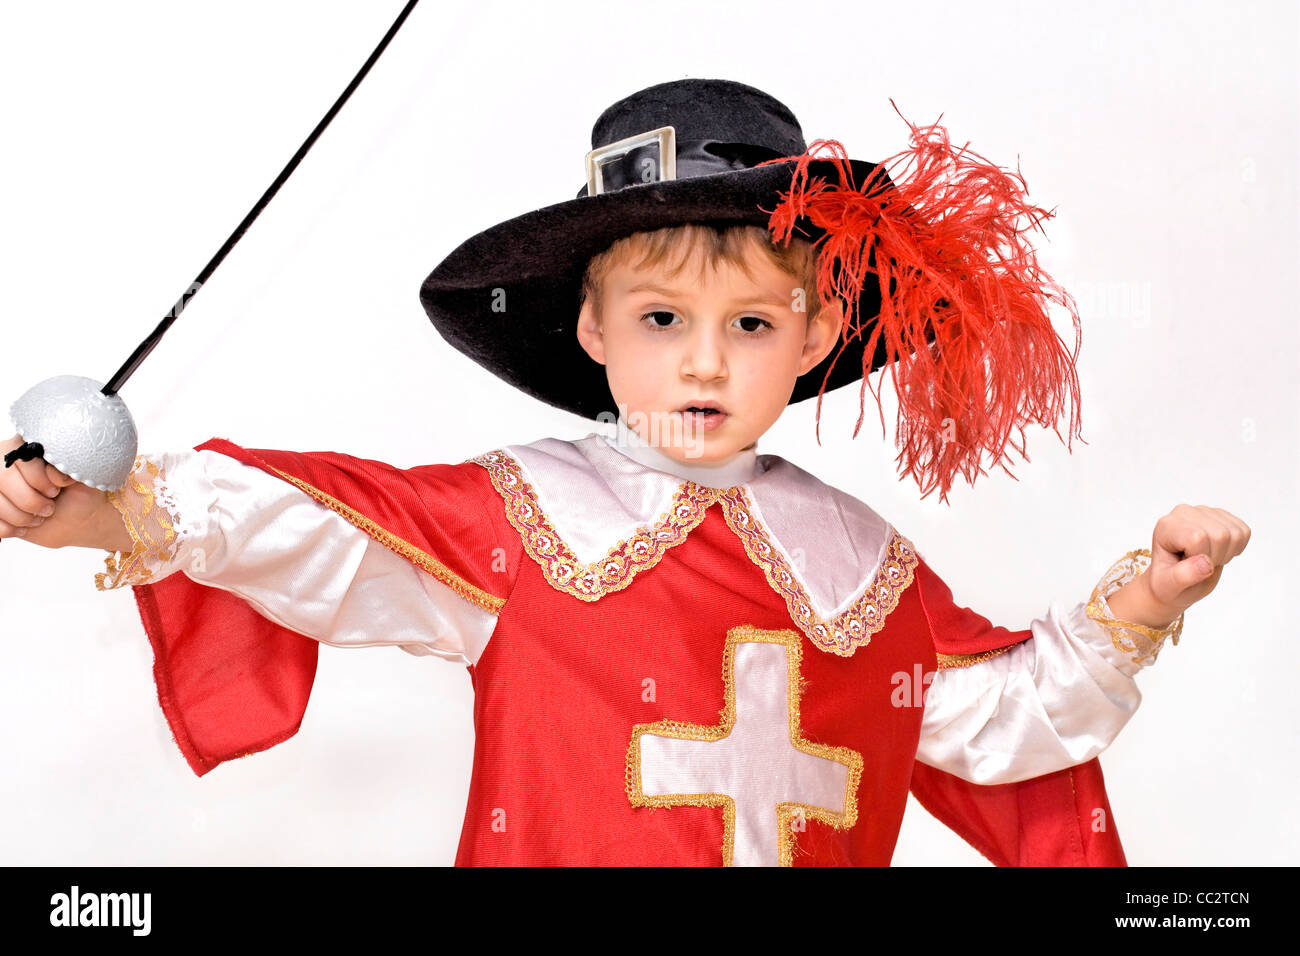 Boy with carnival costume . Little fighting musketeer. Stock Photo